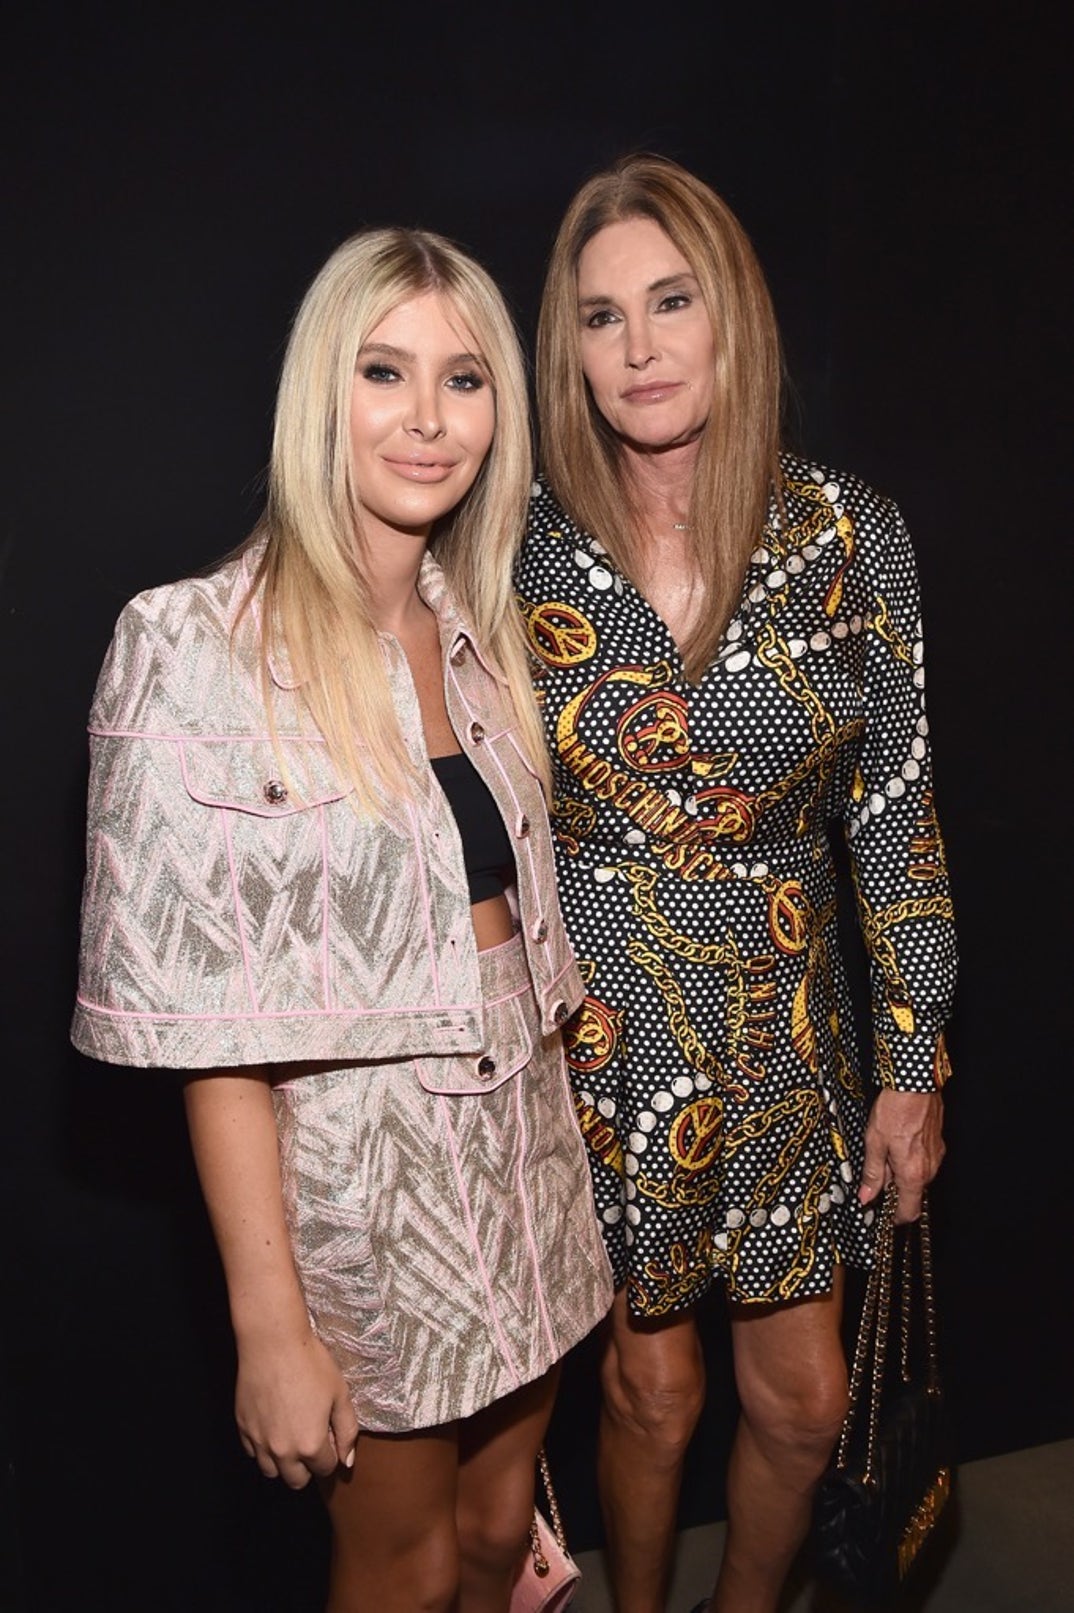 Caitlyn Jenner And Sophia Hutchins Together